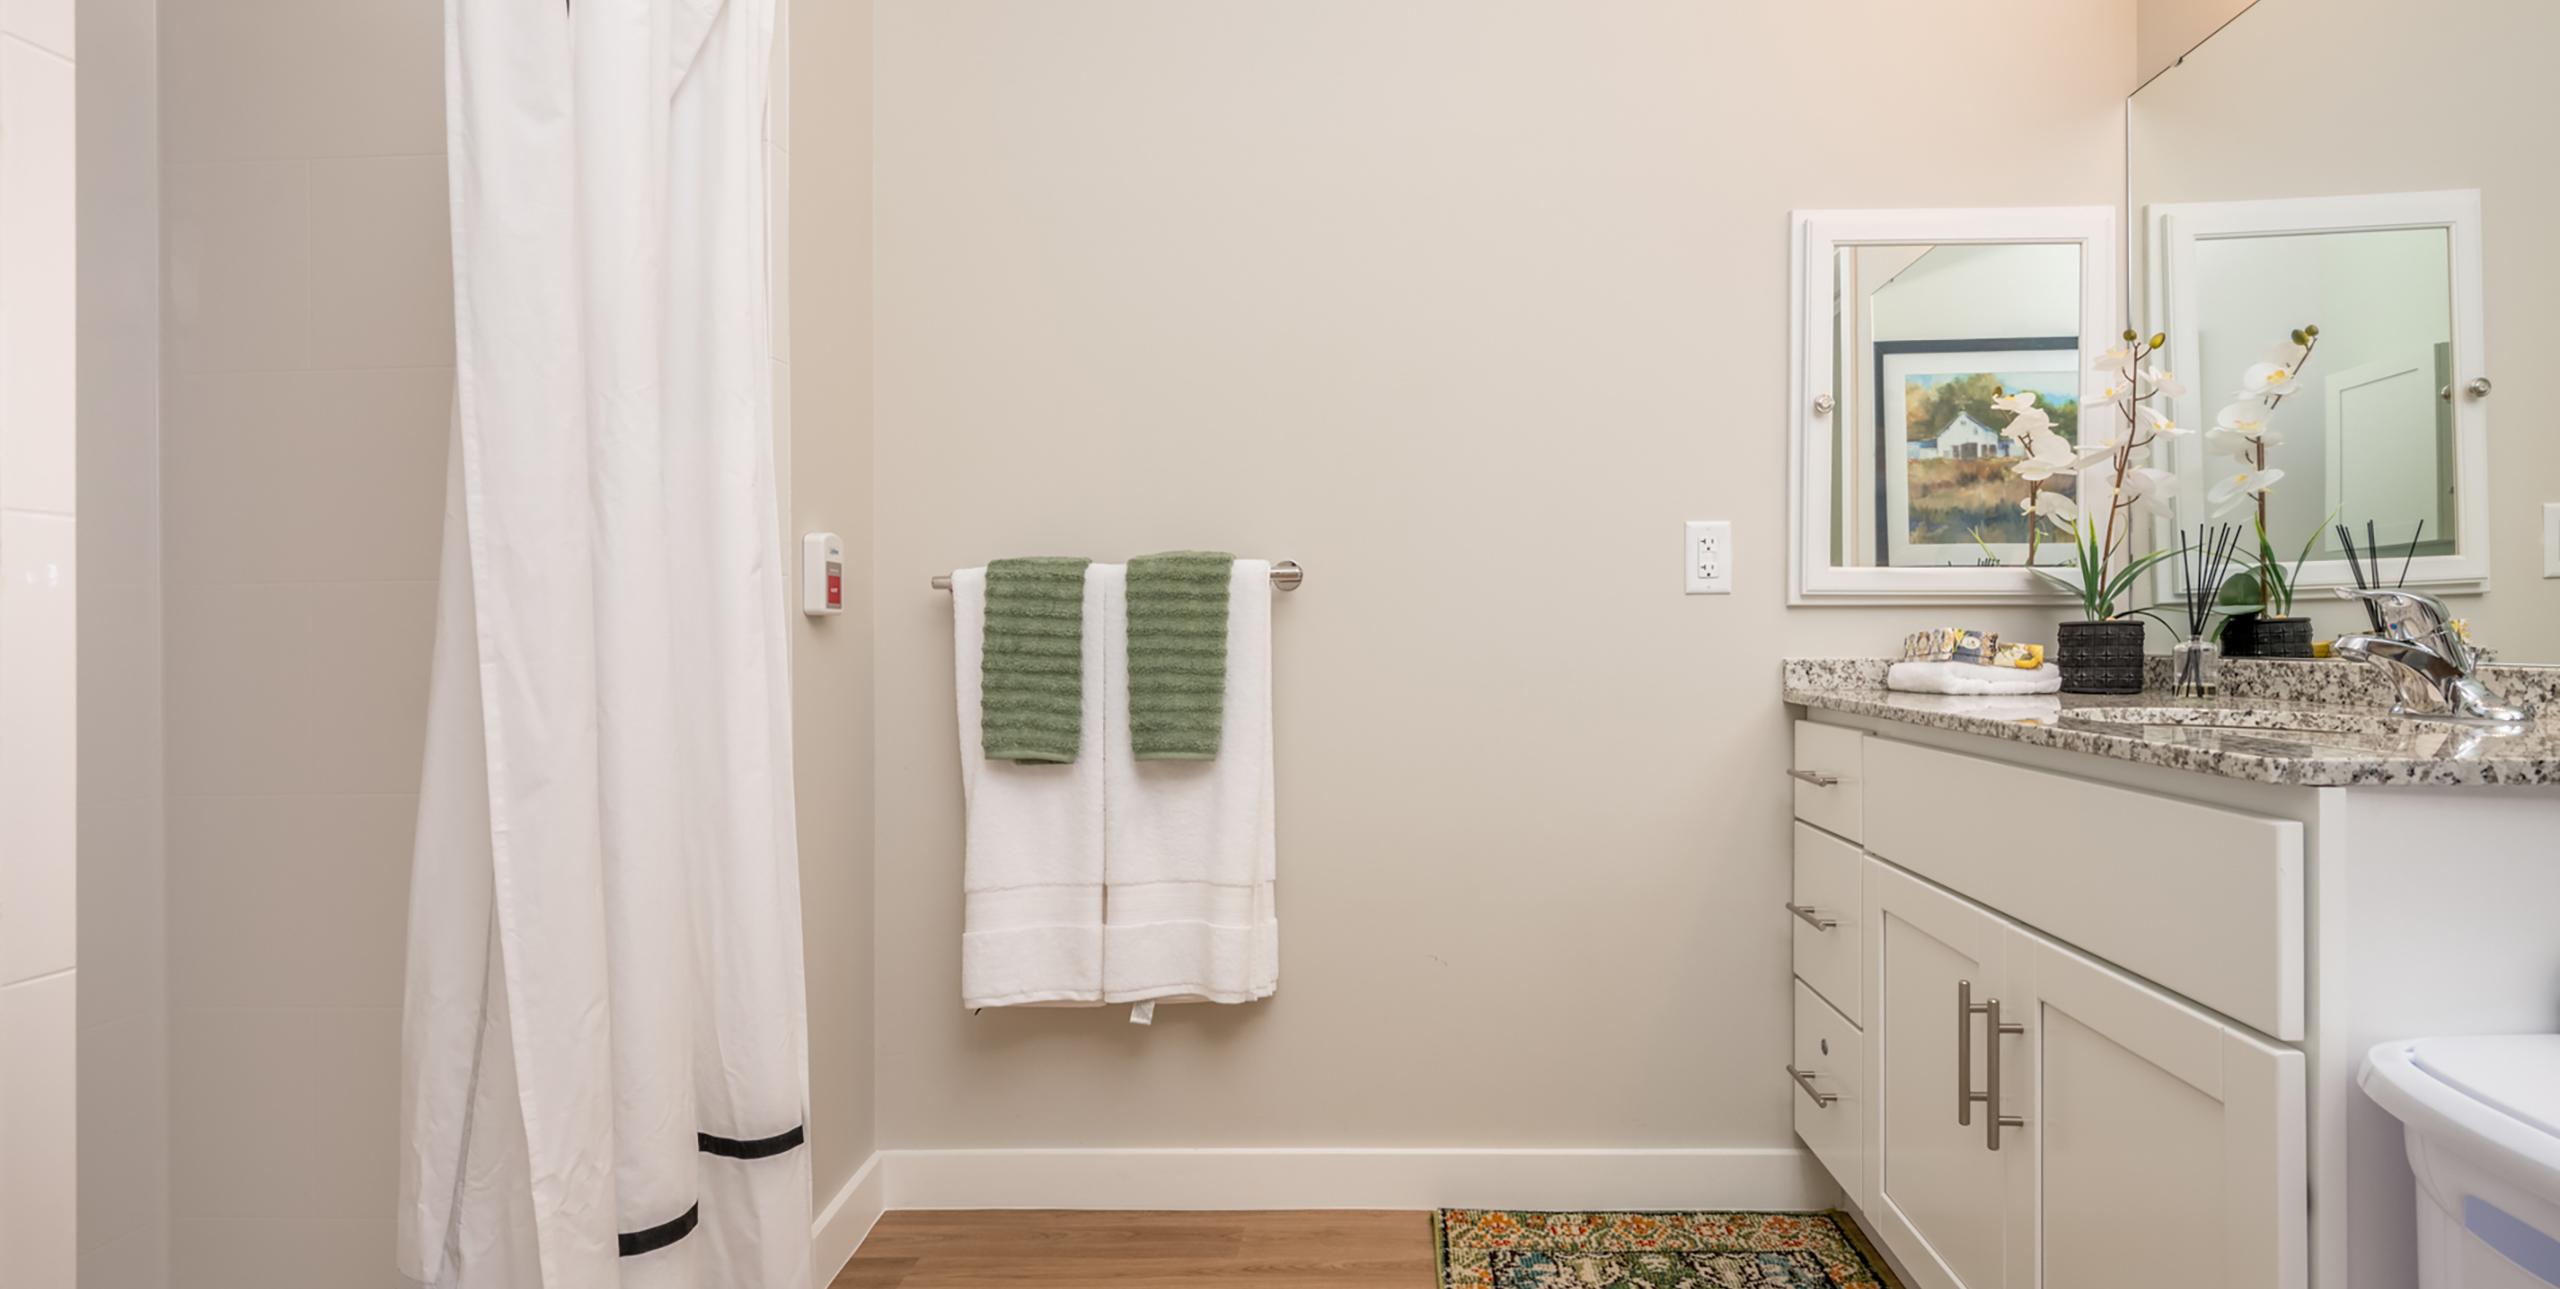 Bathroom with sink, shower, towels and curtains at Brightview Senior Living Port Jeff